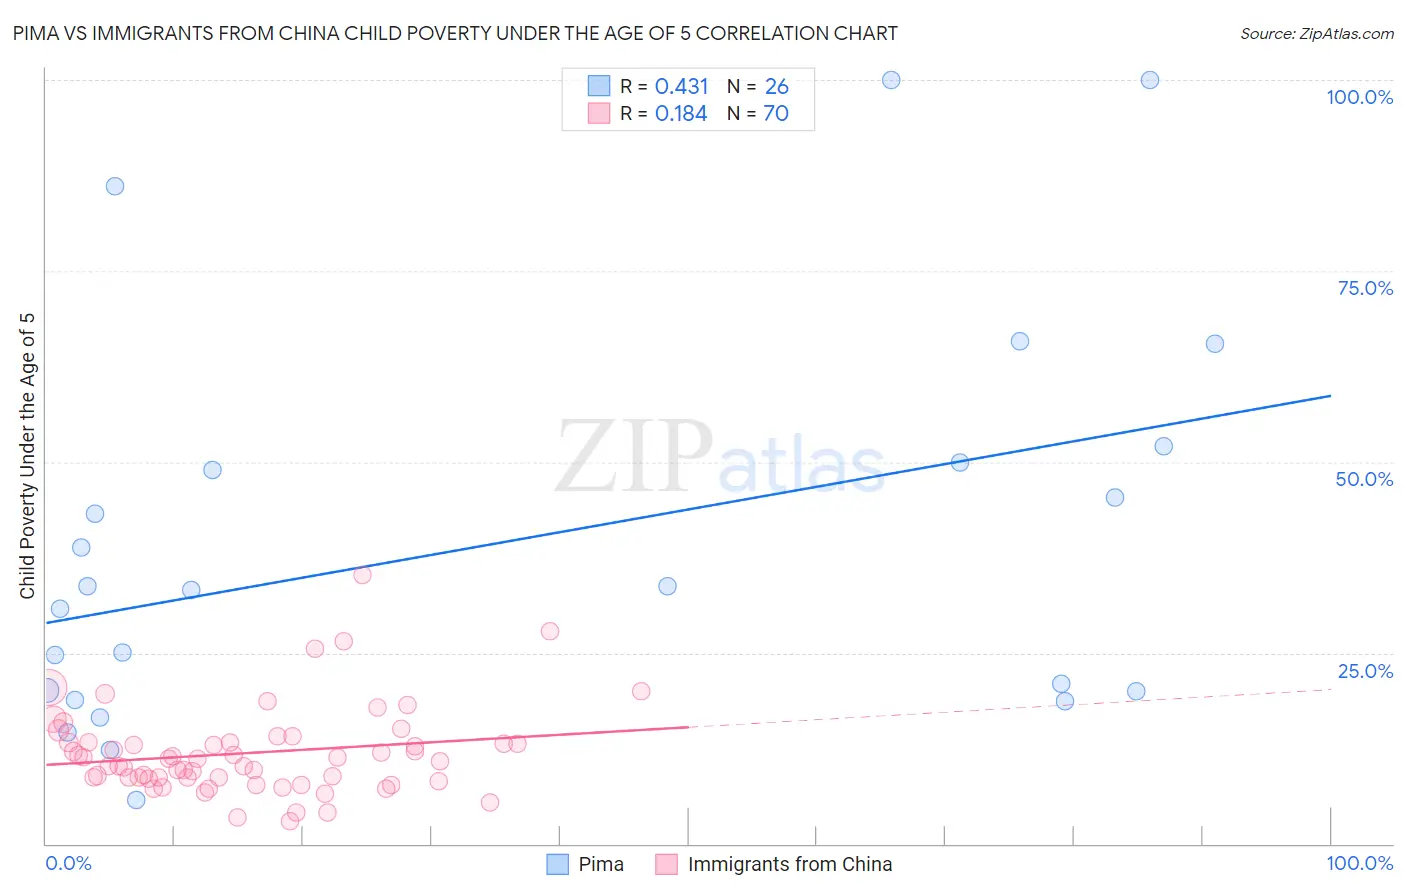 Pima vs Immigrants from China Child Poverty Under the Age of 5